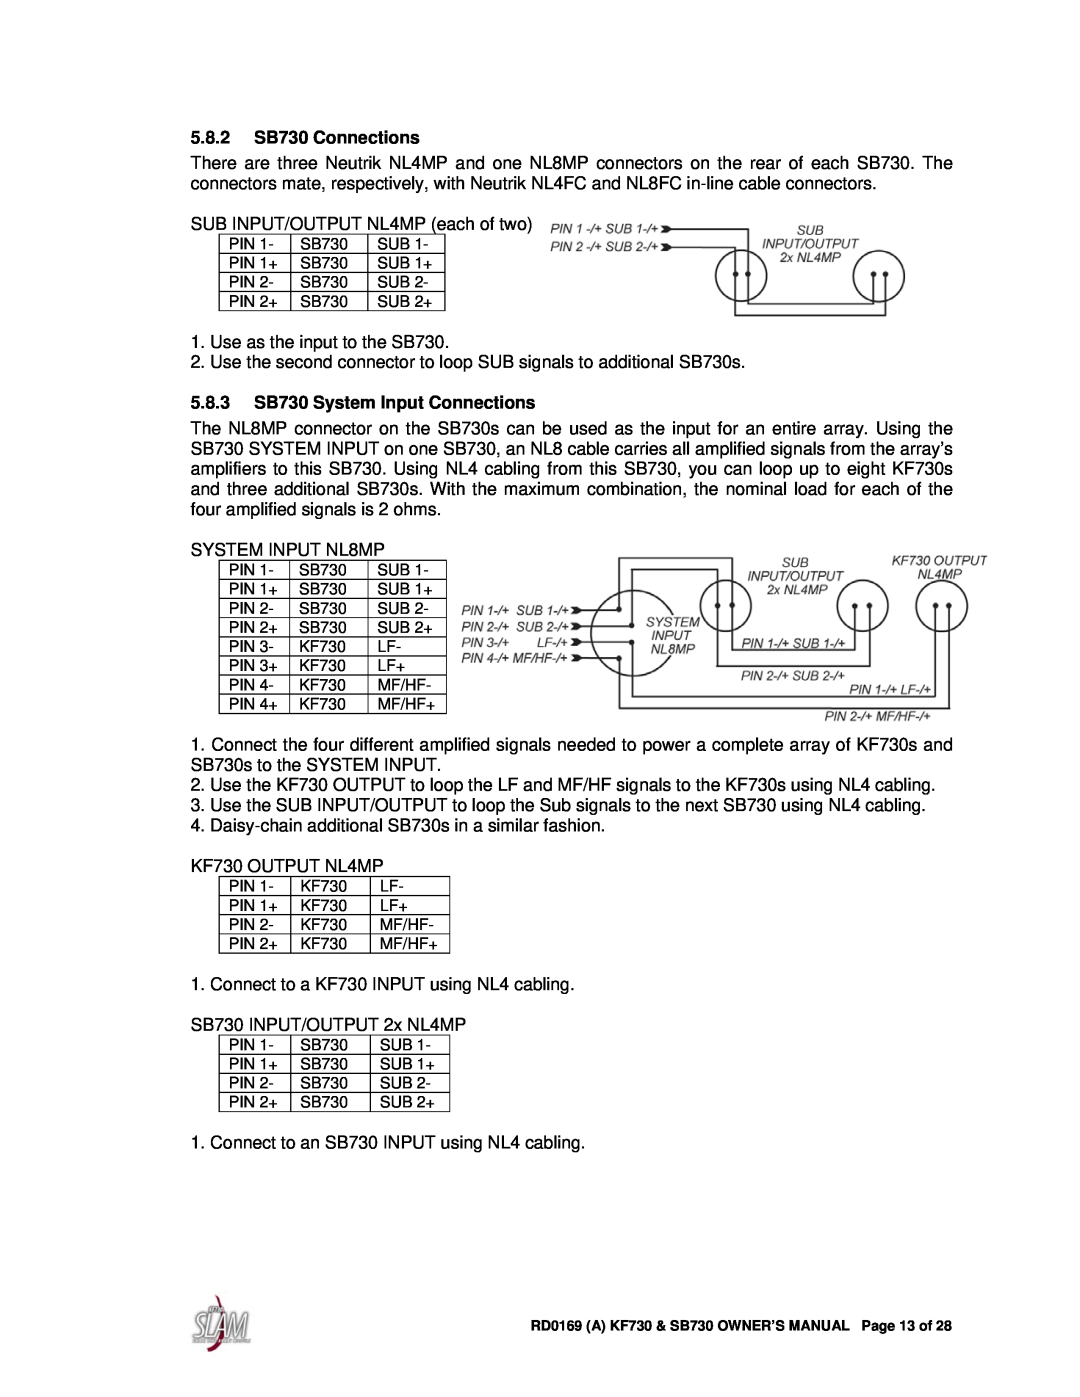 EAW KF730 owner manual 5.8.2SB730 Connections, 5.8.3SB730 System Input Connections 